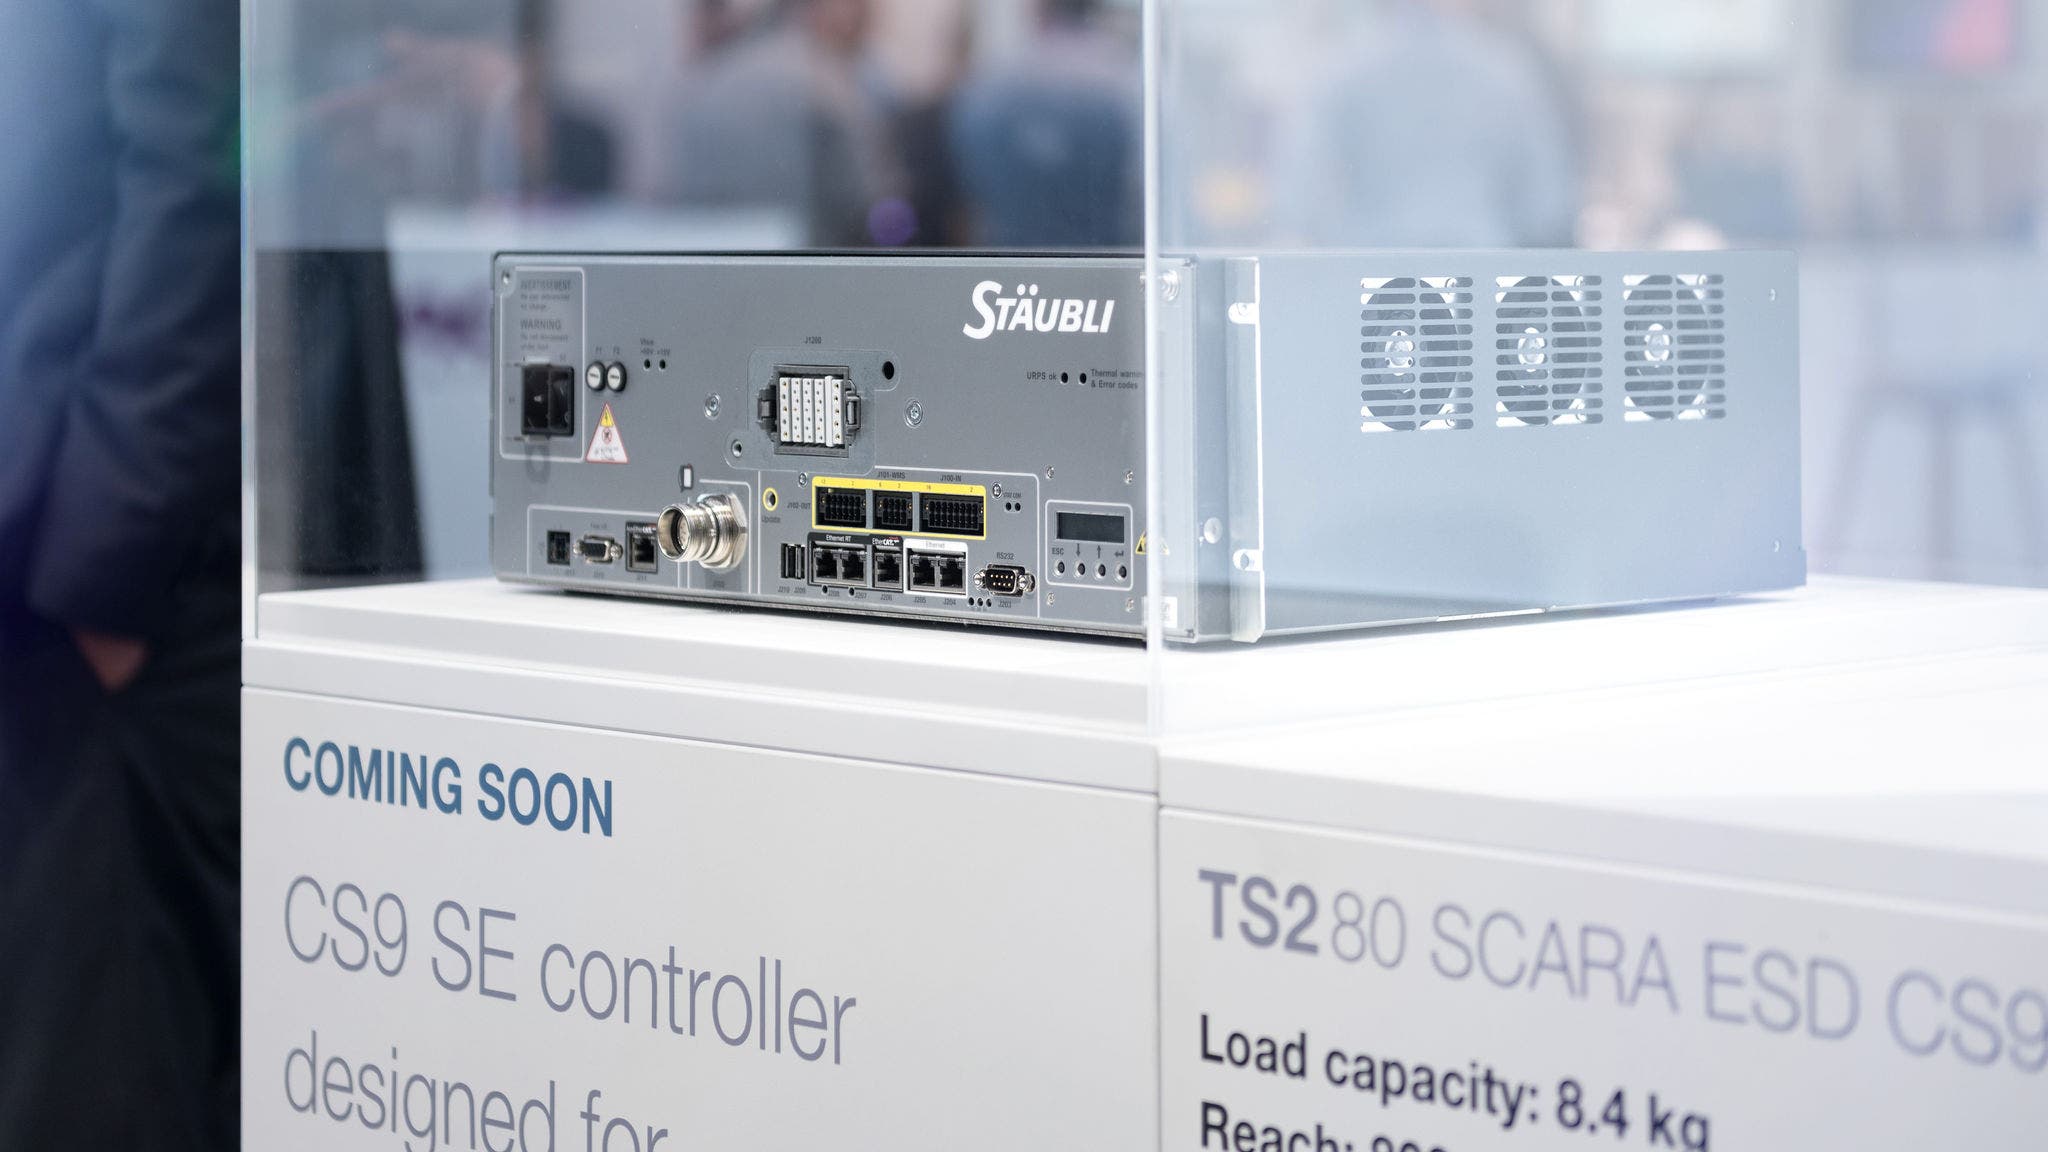 New CS9 SE controller at automatica